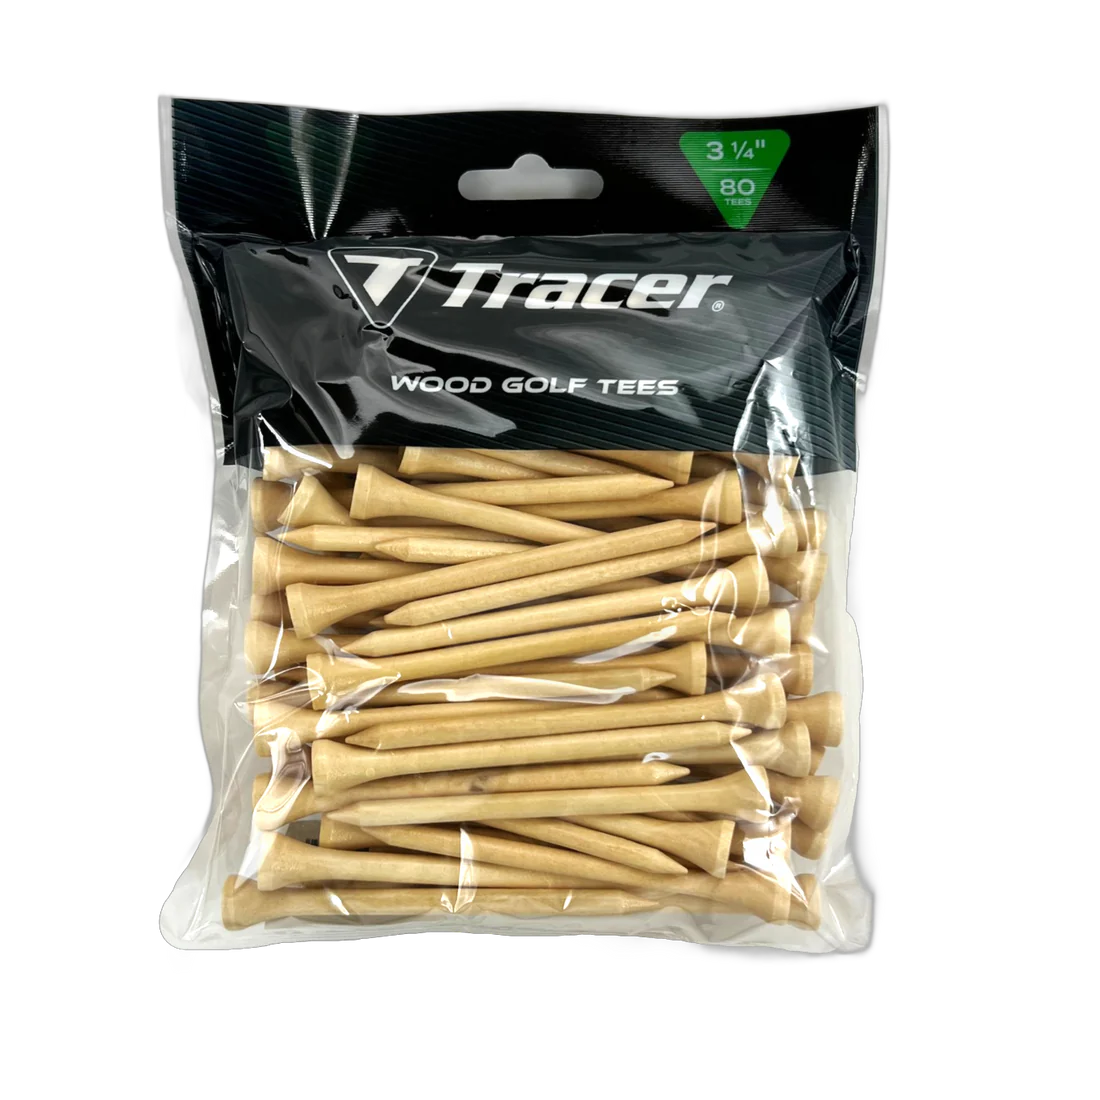 3 1/4” Wood Tracer Tees